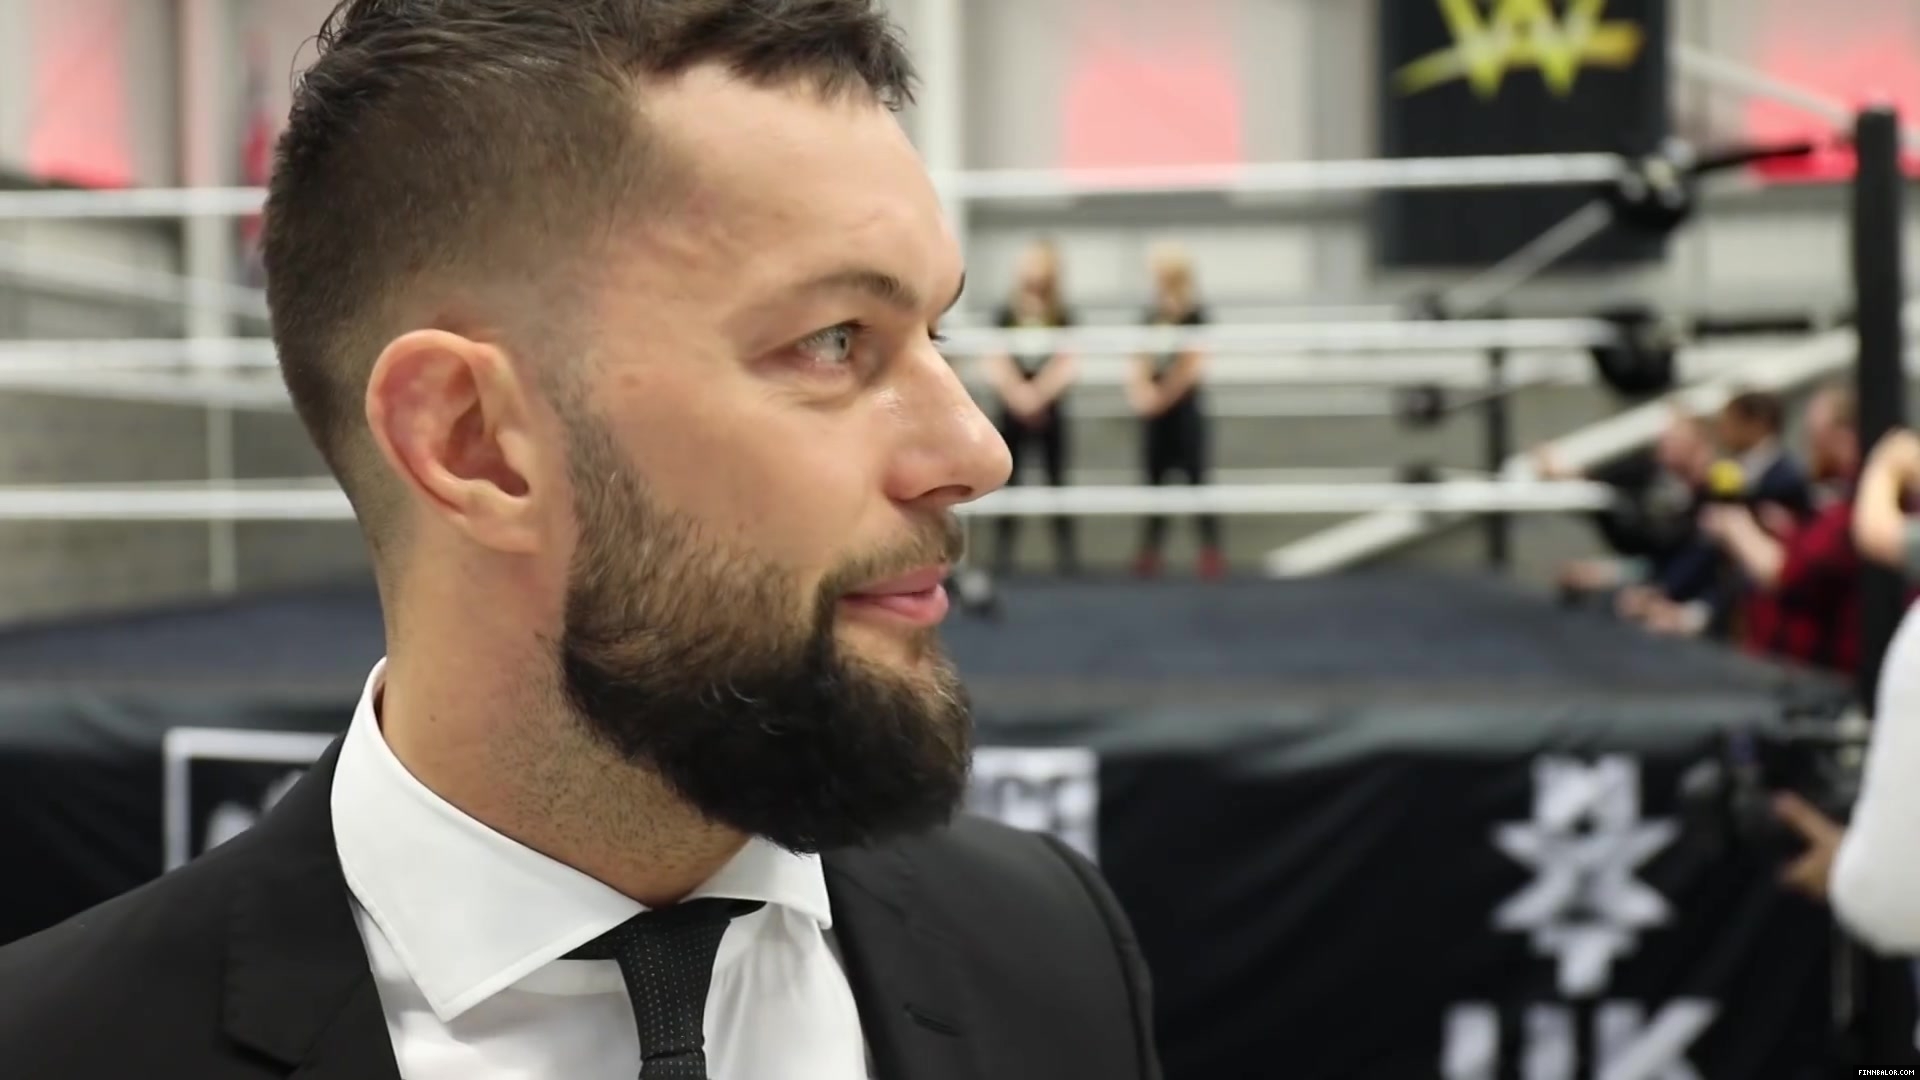 WWE_Superstar_FINN_BALOR_joins_MOUSTACHE_MOUNTAIN_at_the_opening_of_the_NXT_UK_PC_077.jpg